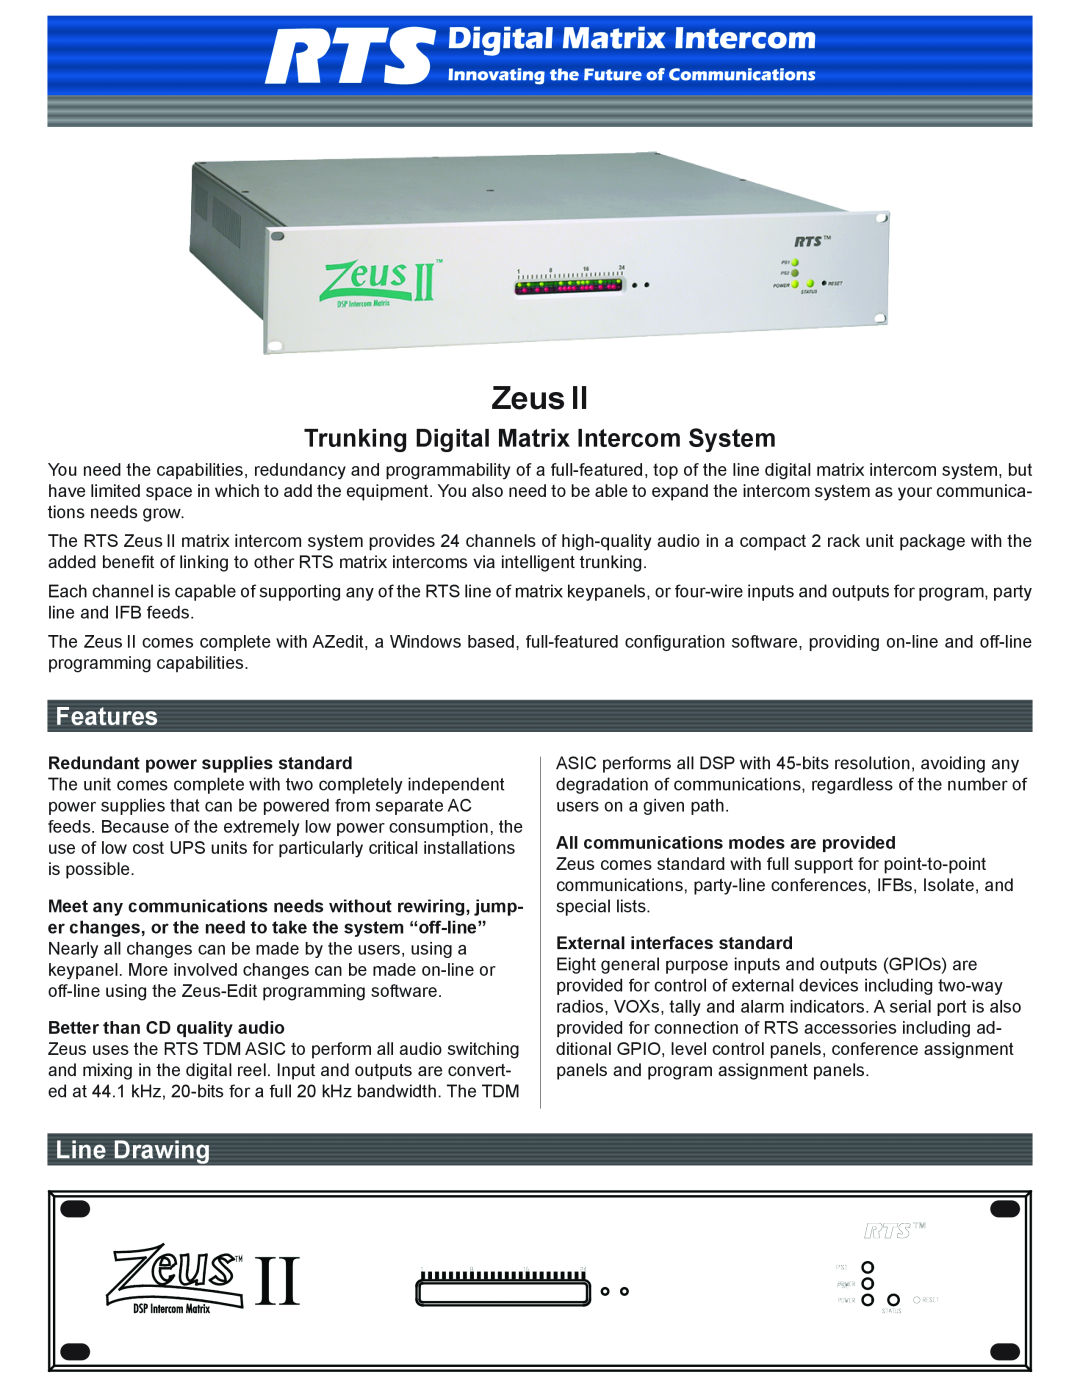 RTS Zeus II manual Redundant power supplies standard, Better than CD quality audio, All communications modes are provided 